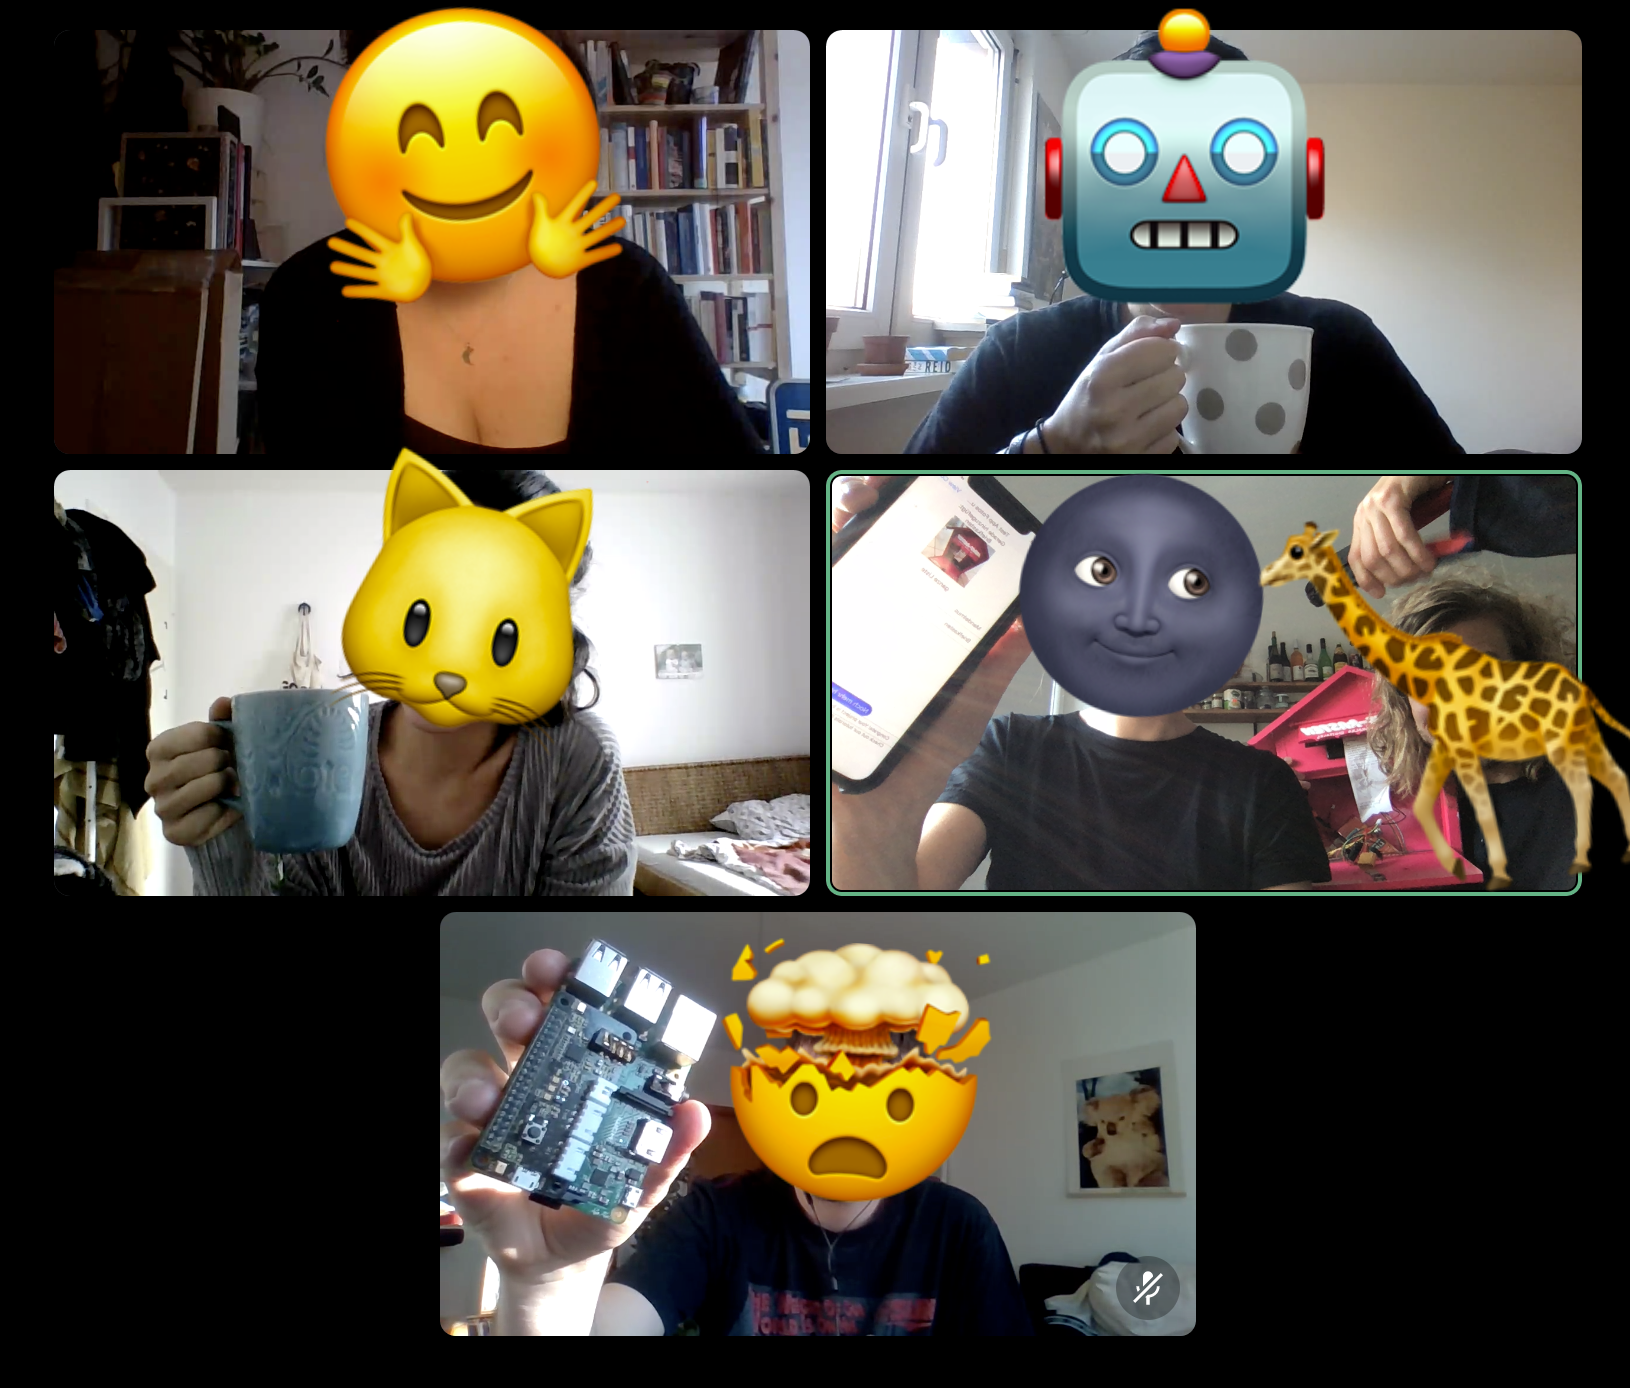 Screenshot of people in a video call